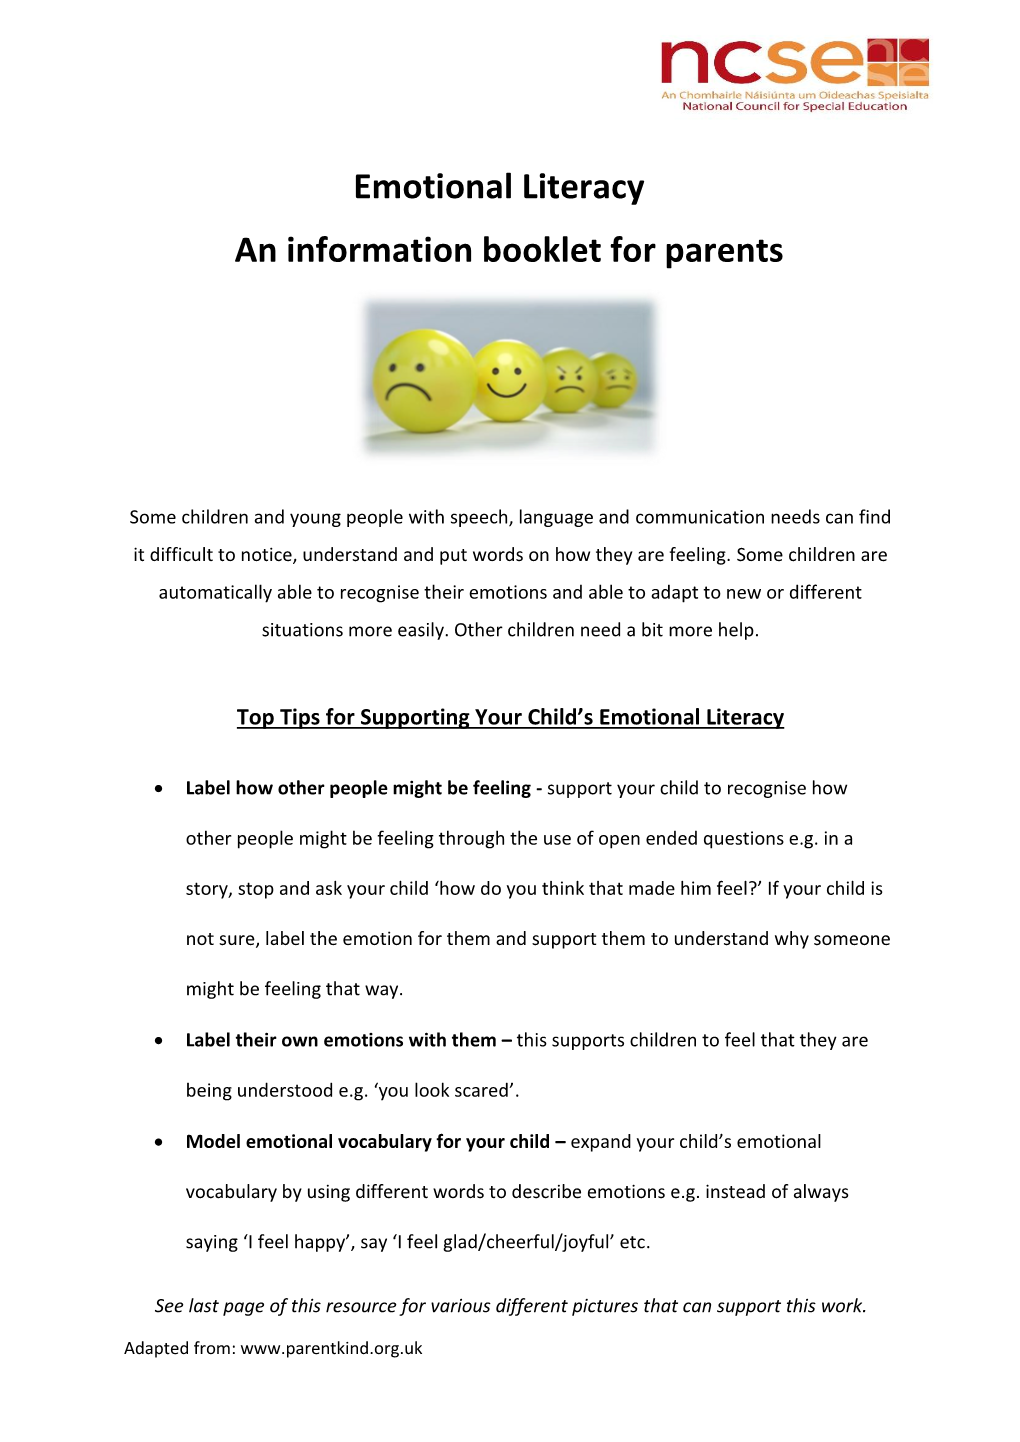 Emotional Literacy an Information Booklet for Parents